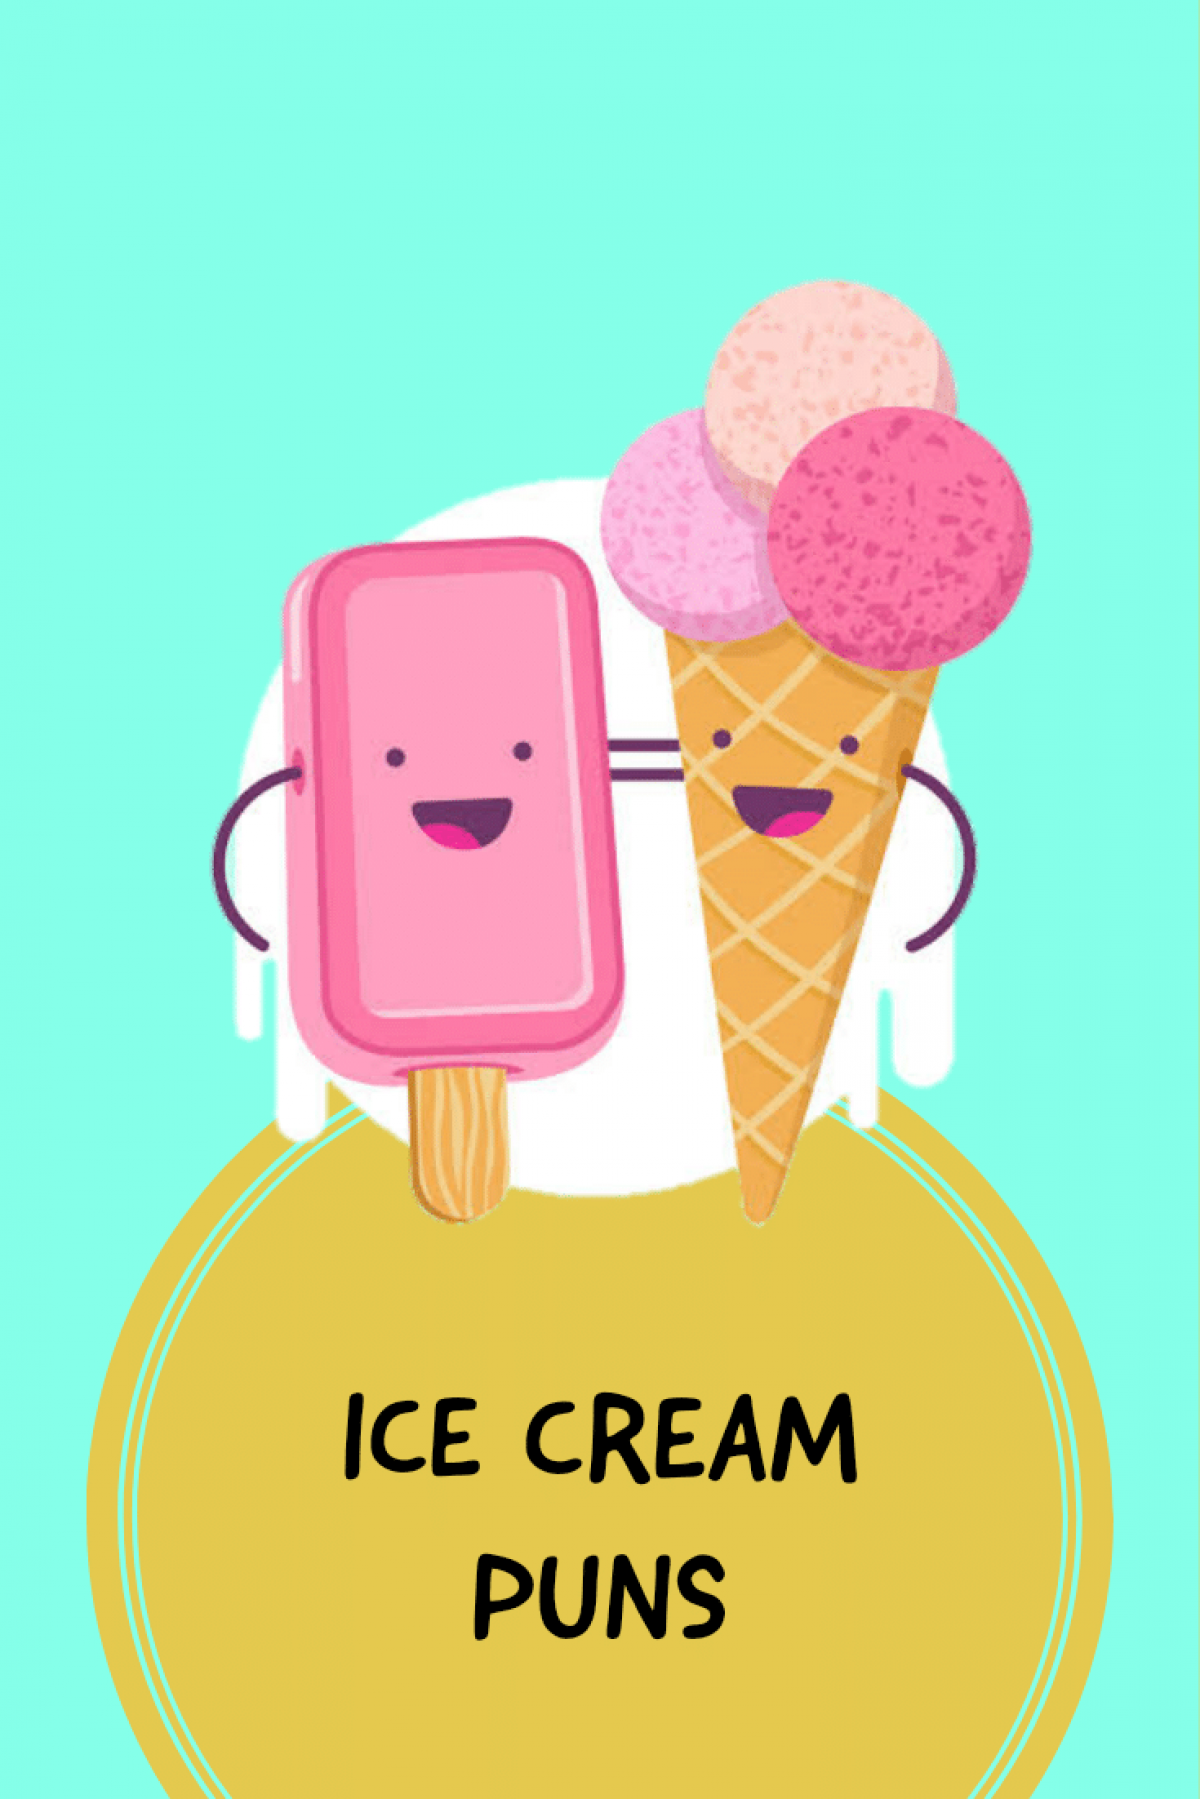 60 Ice Cream Puns That Never Disappoints | Laughitloud